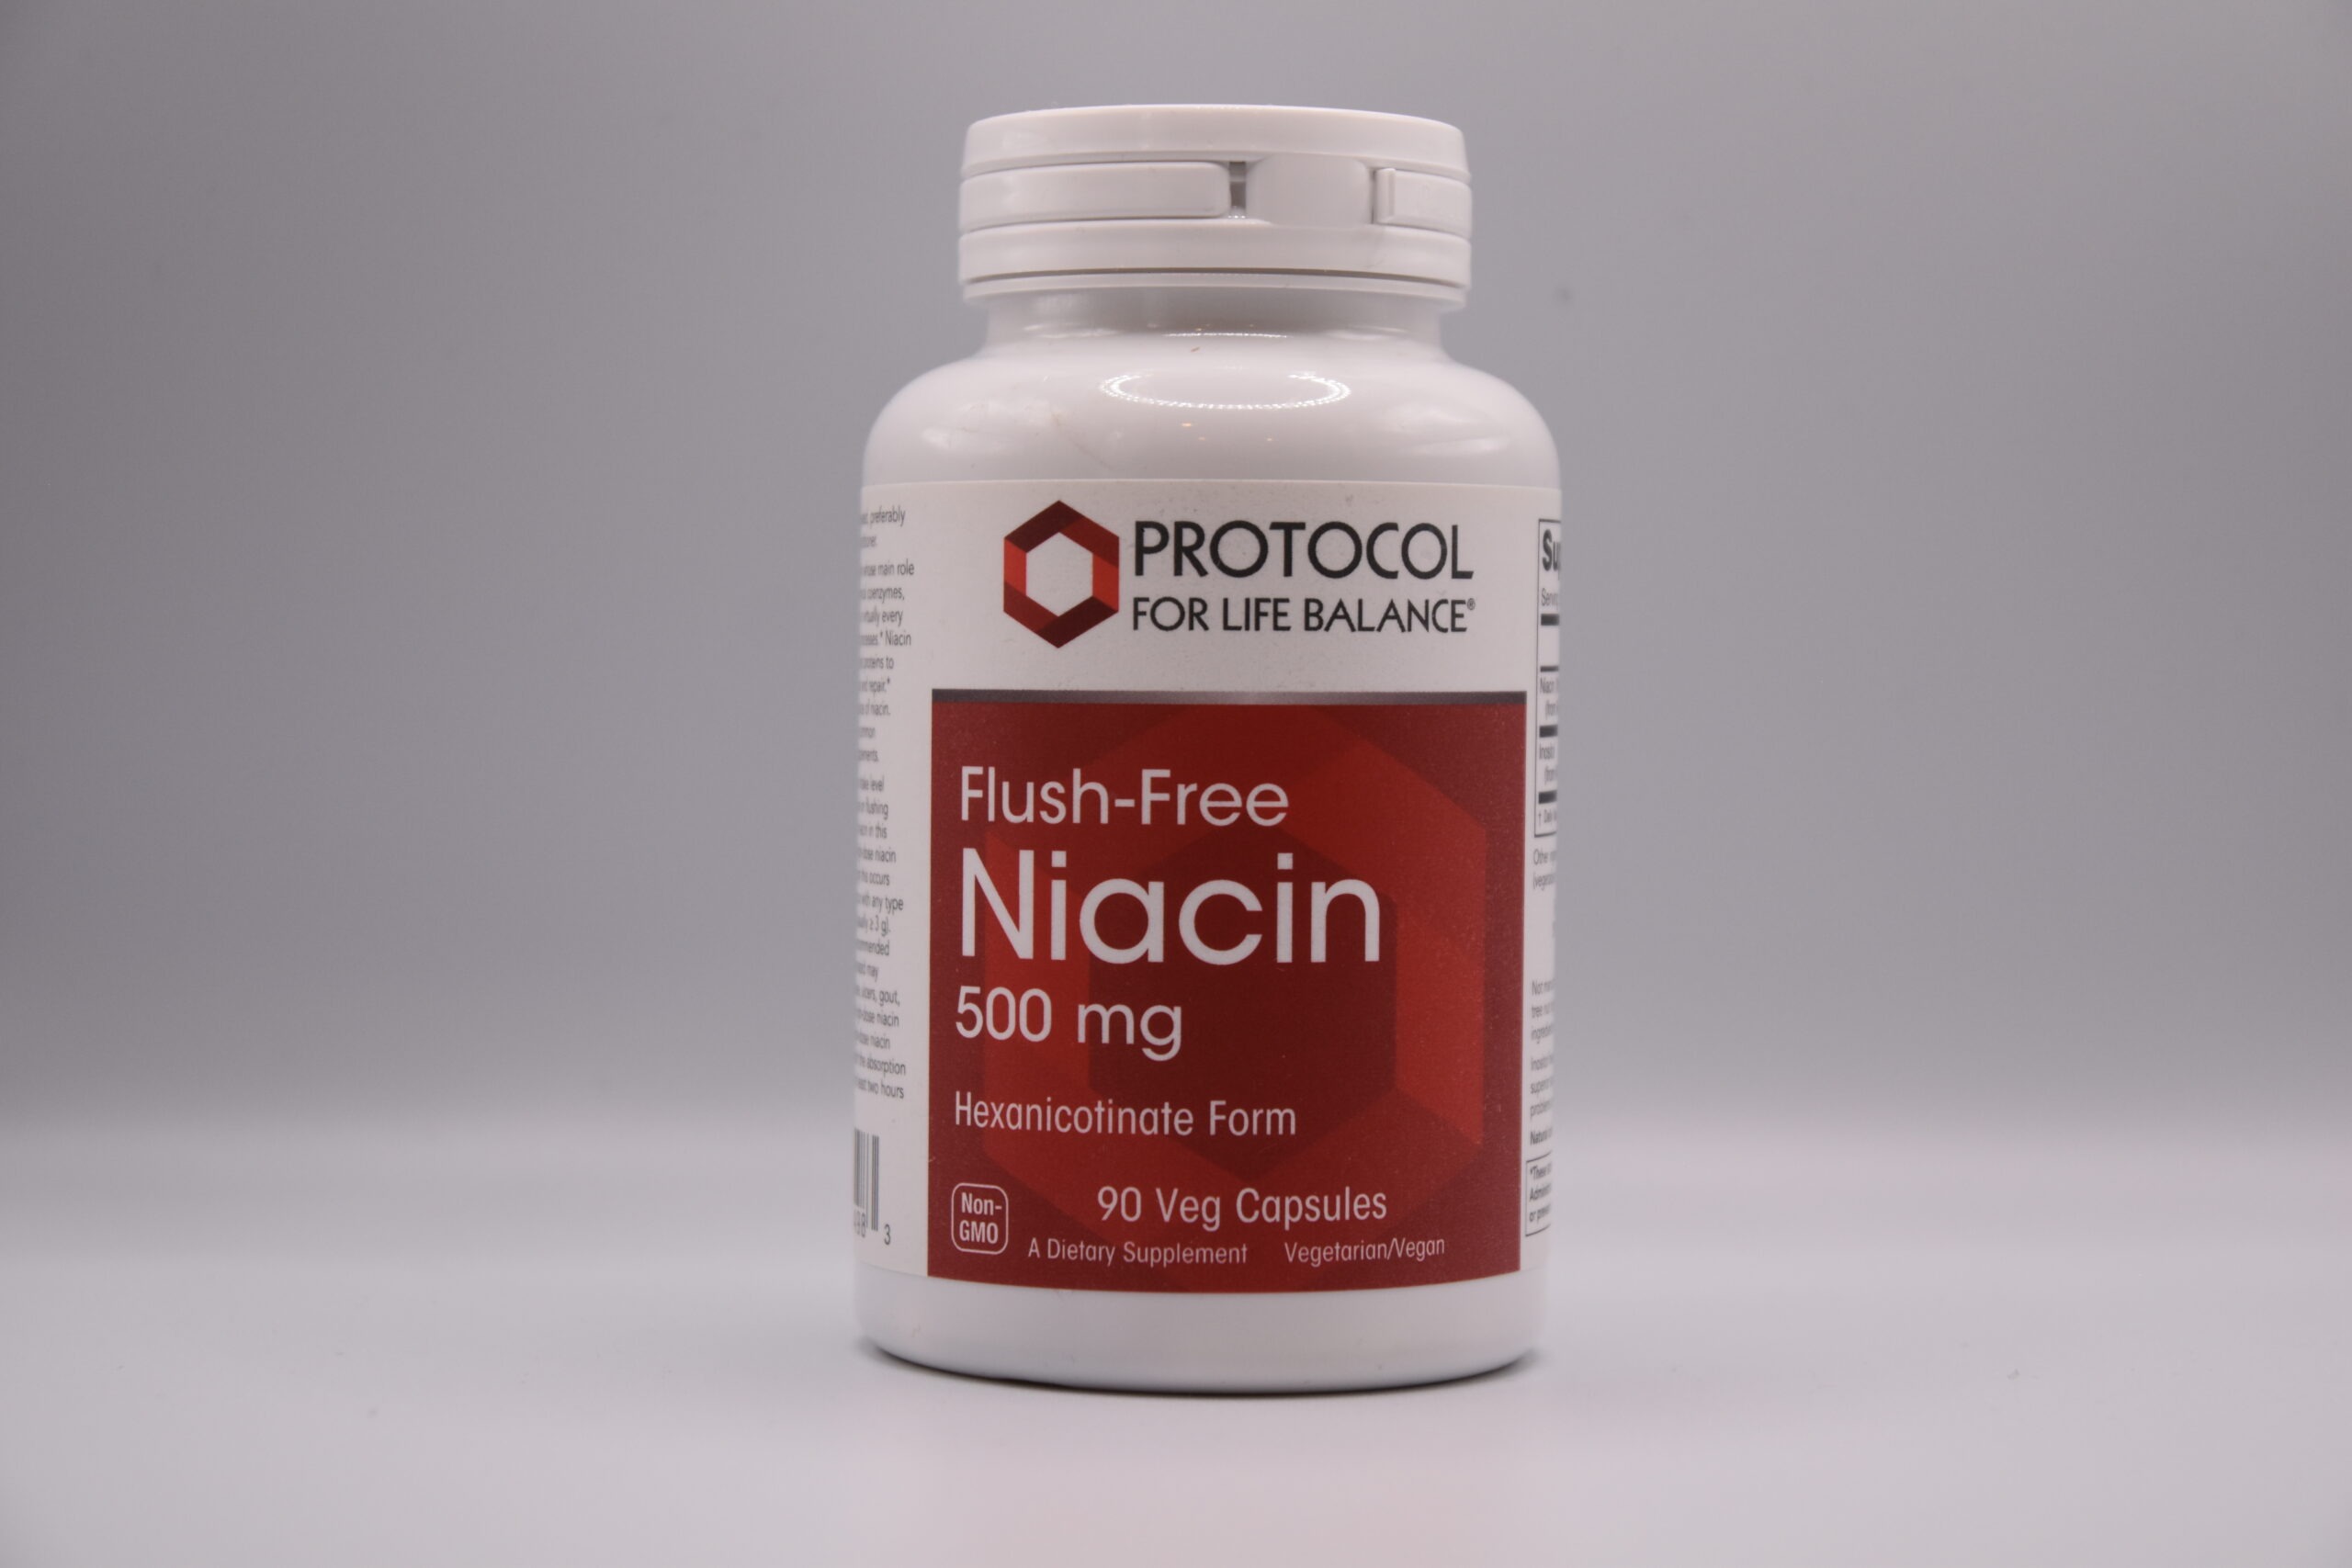 Sentence with product name: A bottle of Flush-Free Niacin brand flush-free niacin, 500 mg hexanicotinate form, containing 90 veg capsules as a dietary supplement.